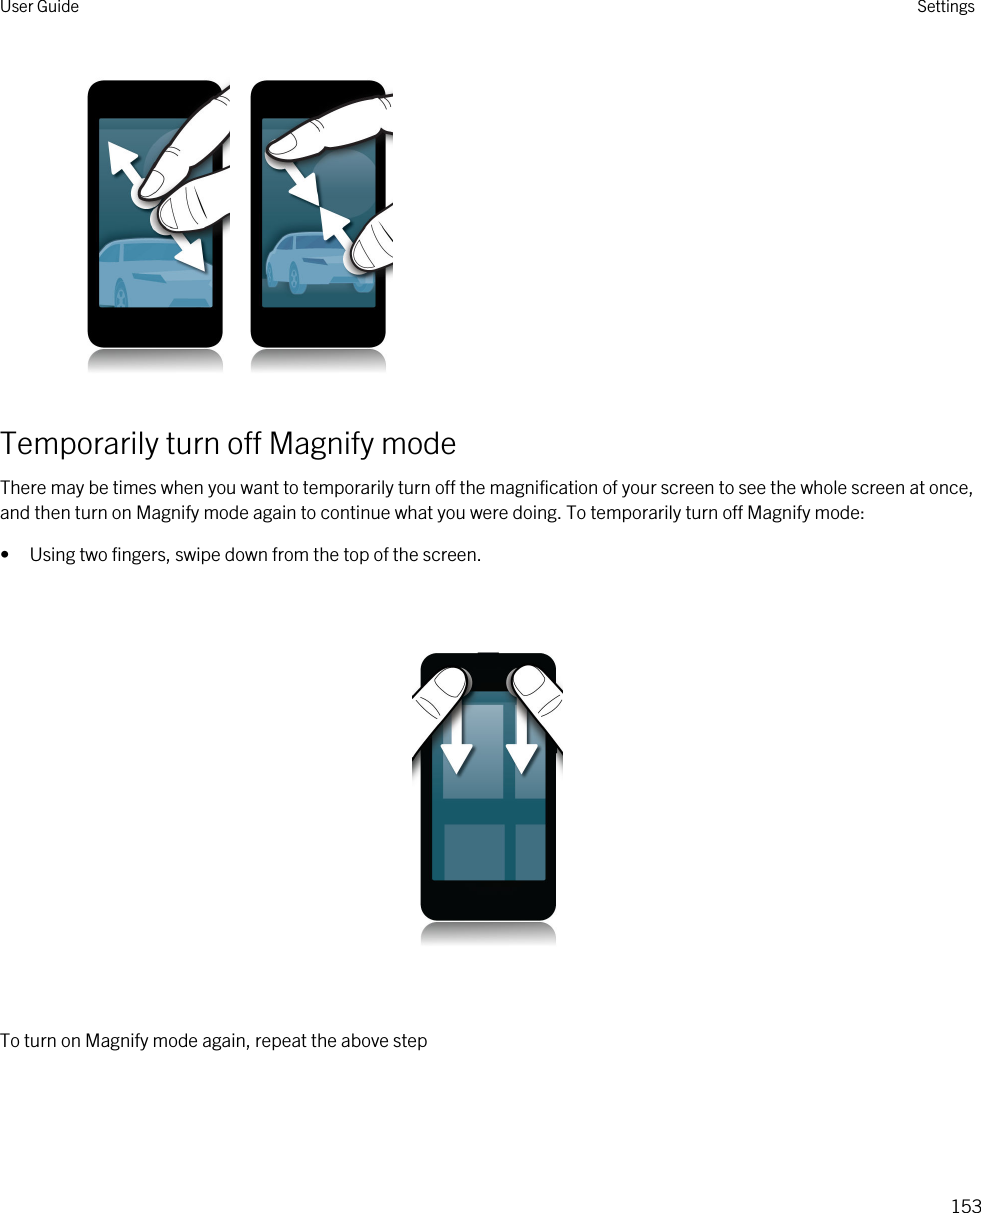    Temporarily turn off Magnify modeThere may be times when you want to temporarily turn off the magnification of your screen to see the whole screen at once, and then turn on Magnify mode again to continue what you were doing. To temporarily turn off Magnify mode:• Using two fingers, swipe down from the top of the screen.  To turn on Magnify mode again, repeat the above stepUser Guide Settings153